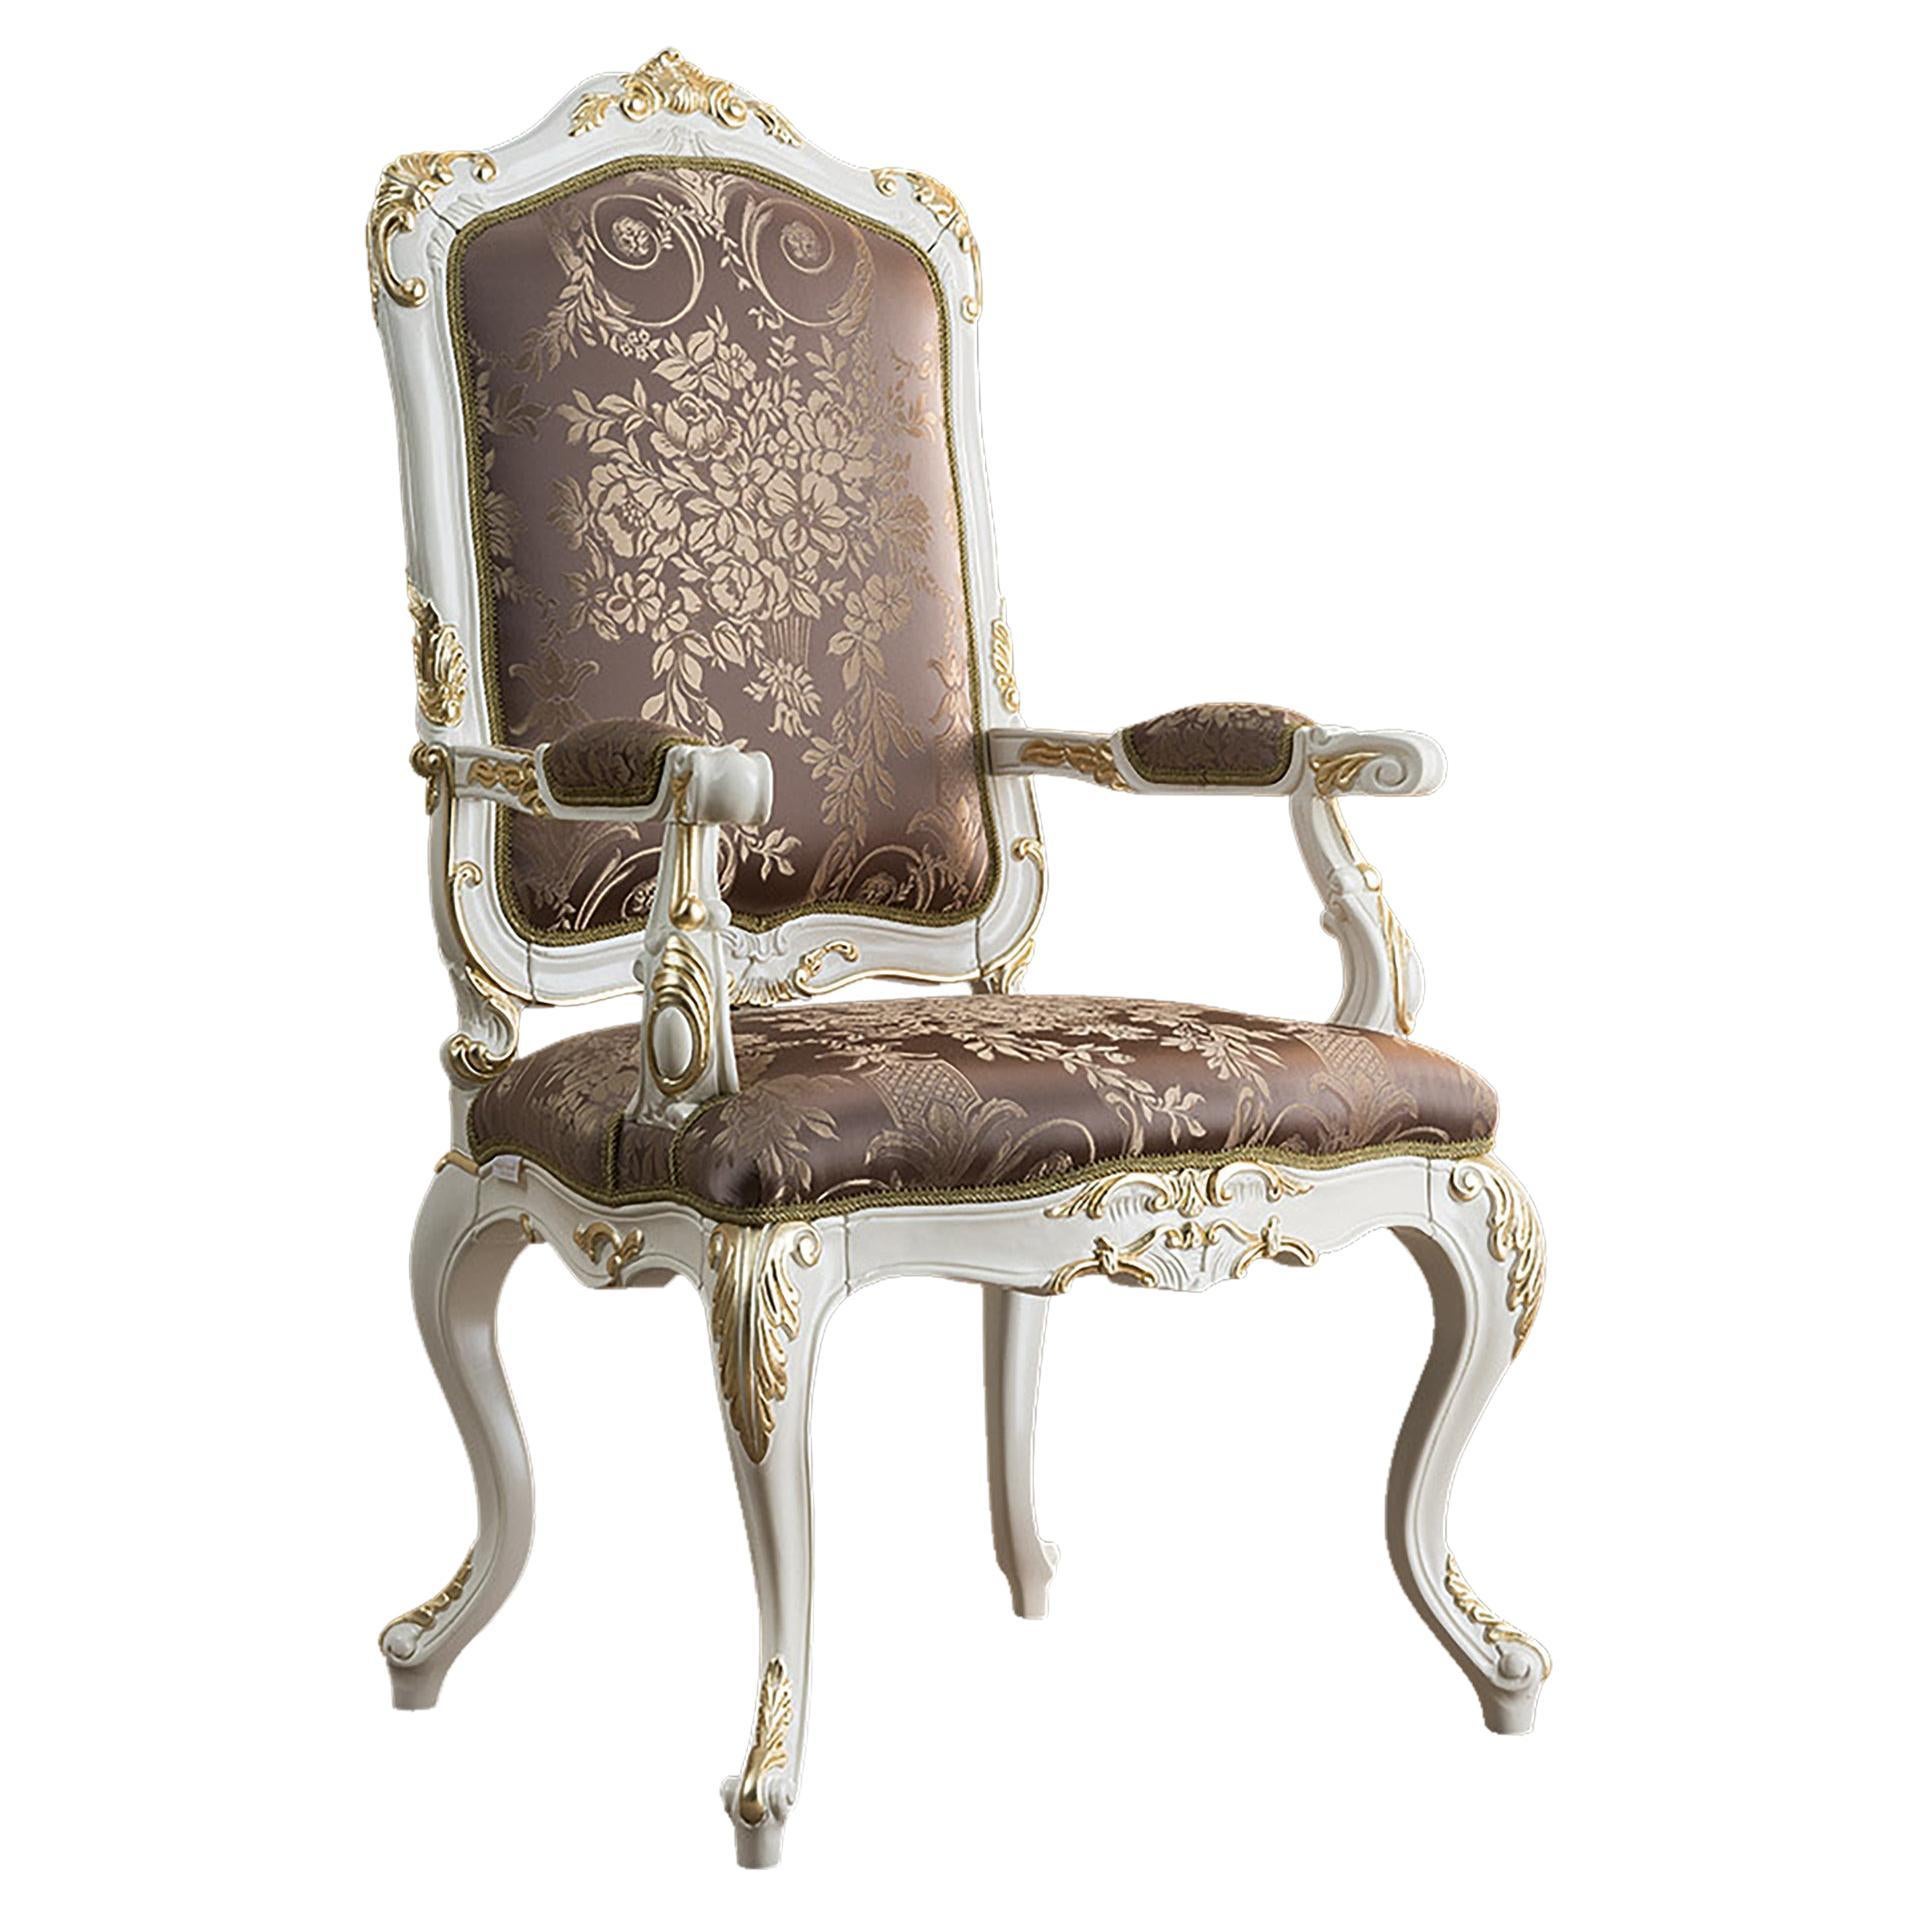 CHAIRS FRANCE BAROQUE STYLE DINING ROYAL CHAIR WITH ARMRESTS CREME UK #70F31 